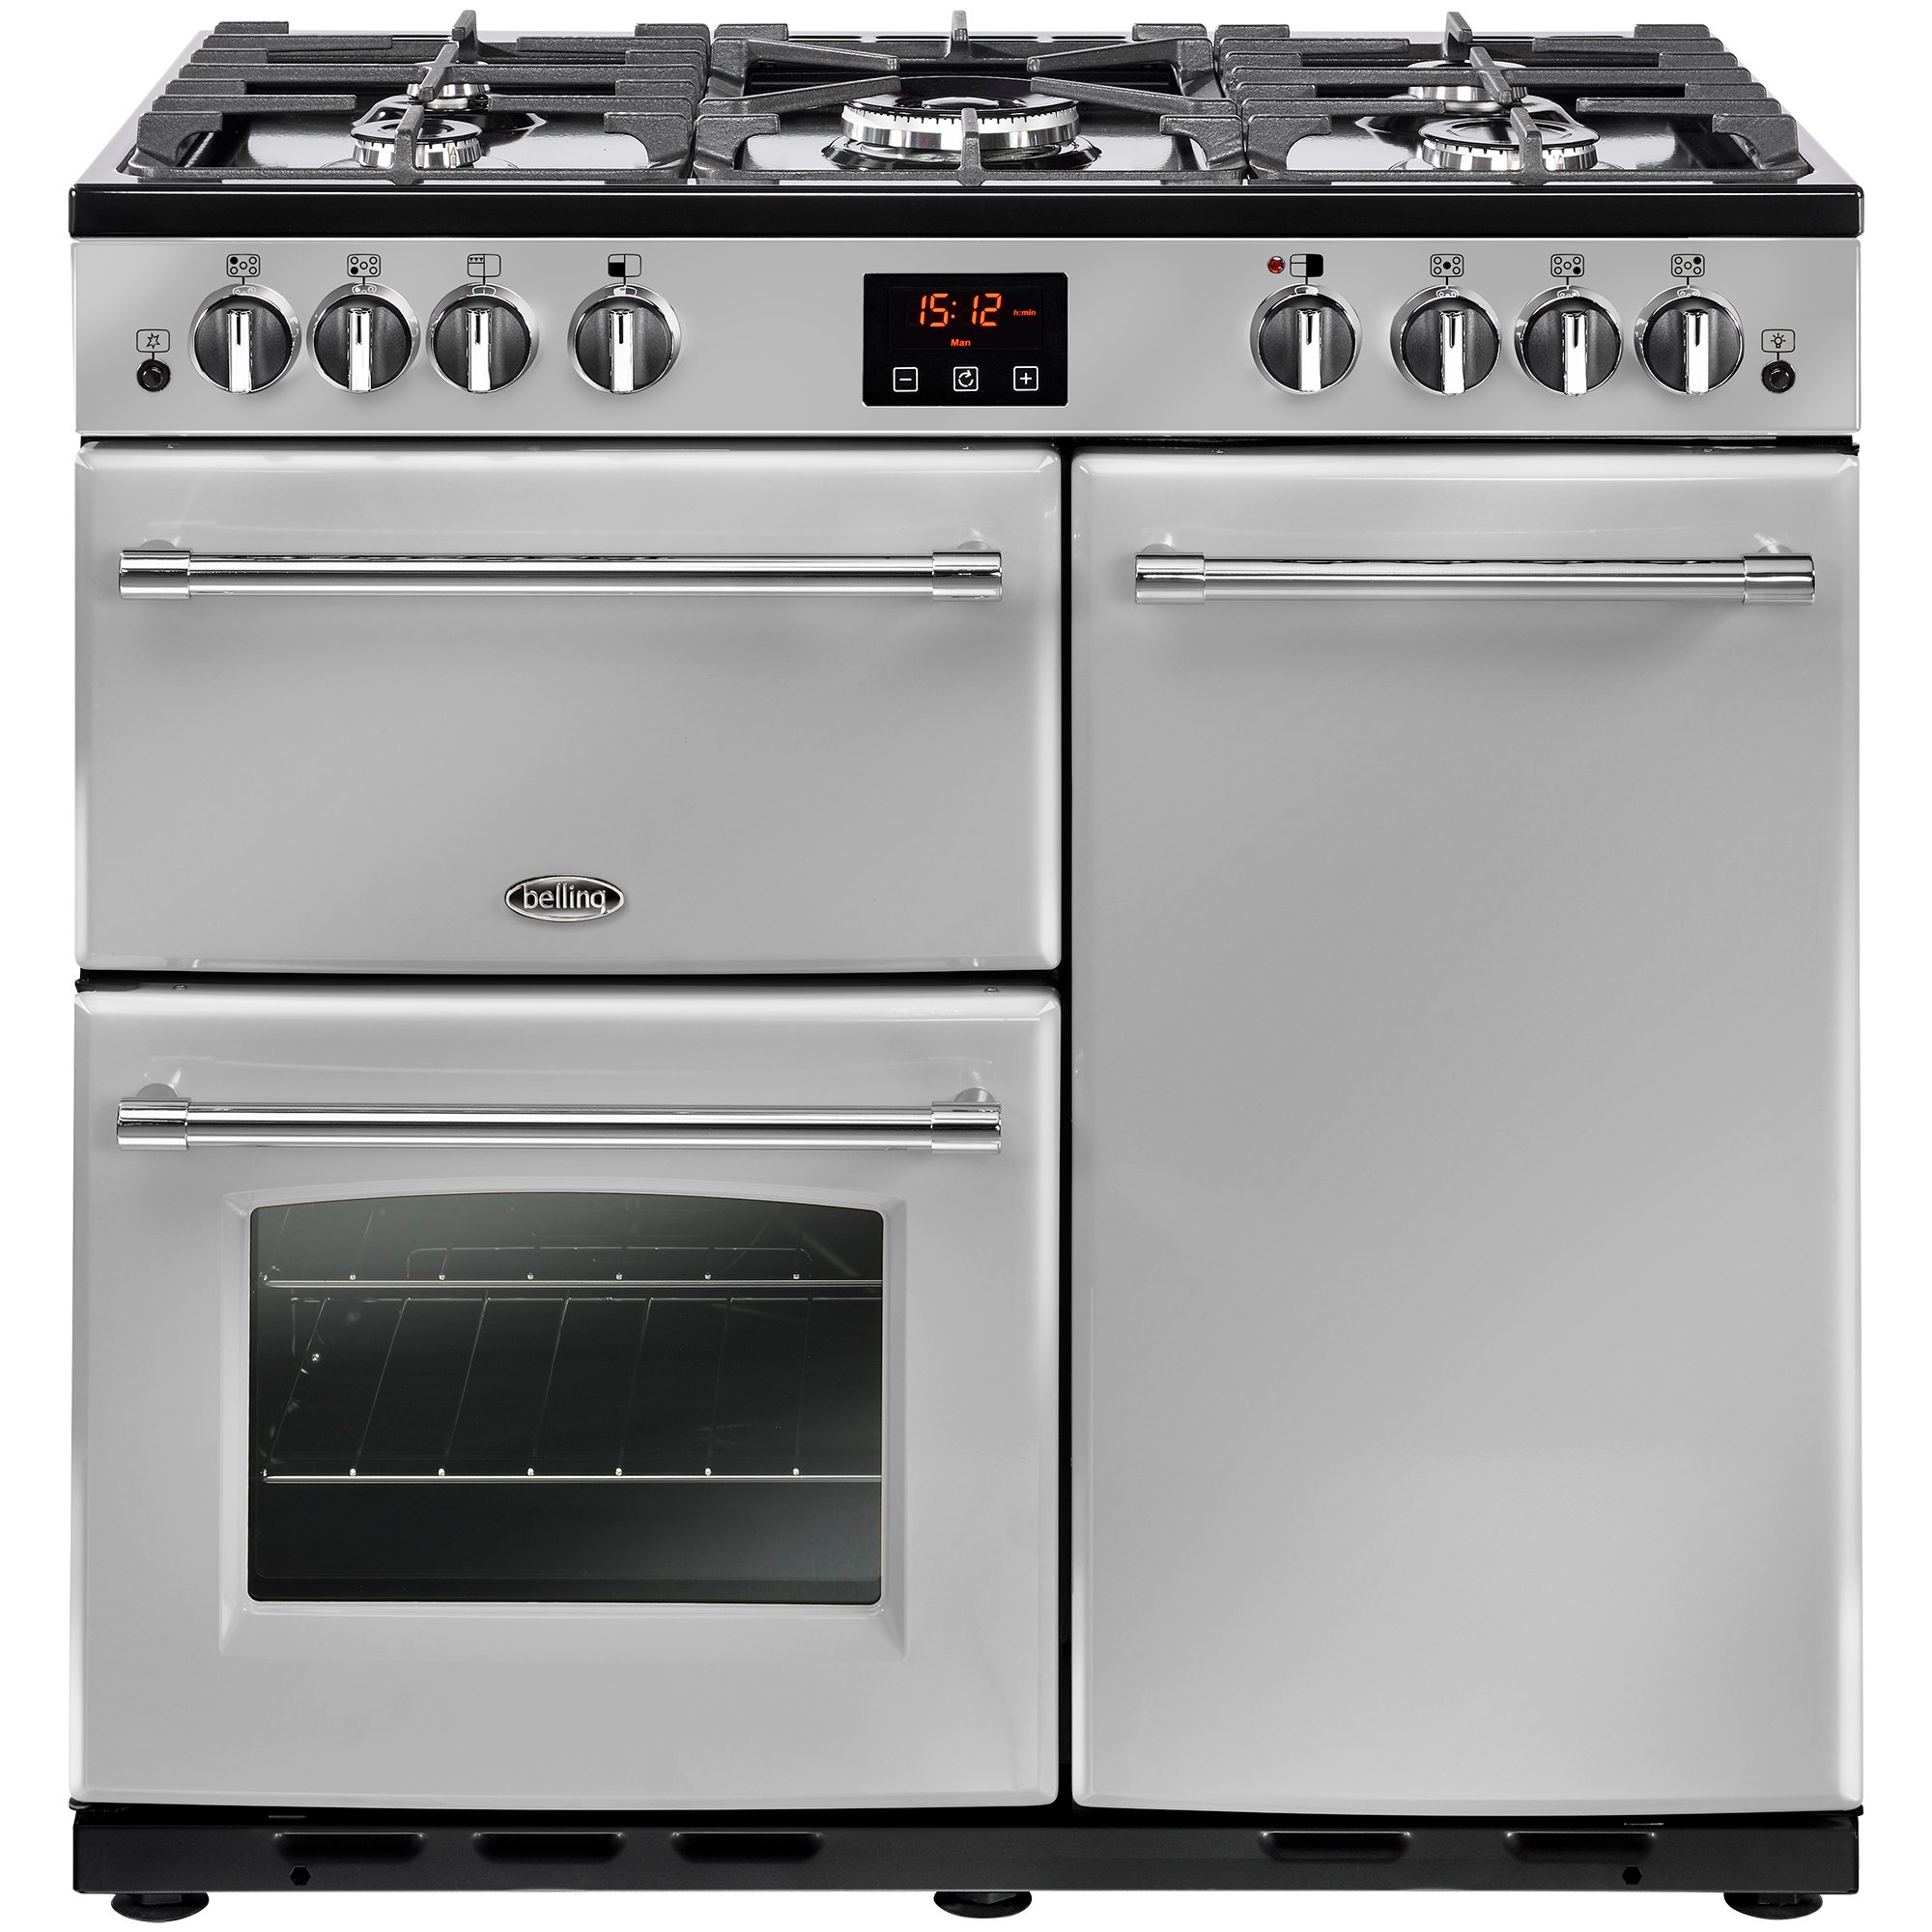 90cm gas range cooker with 4kW PowerWok burner, Maxi-Clock, market leading tall oven and easy clean enamel